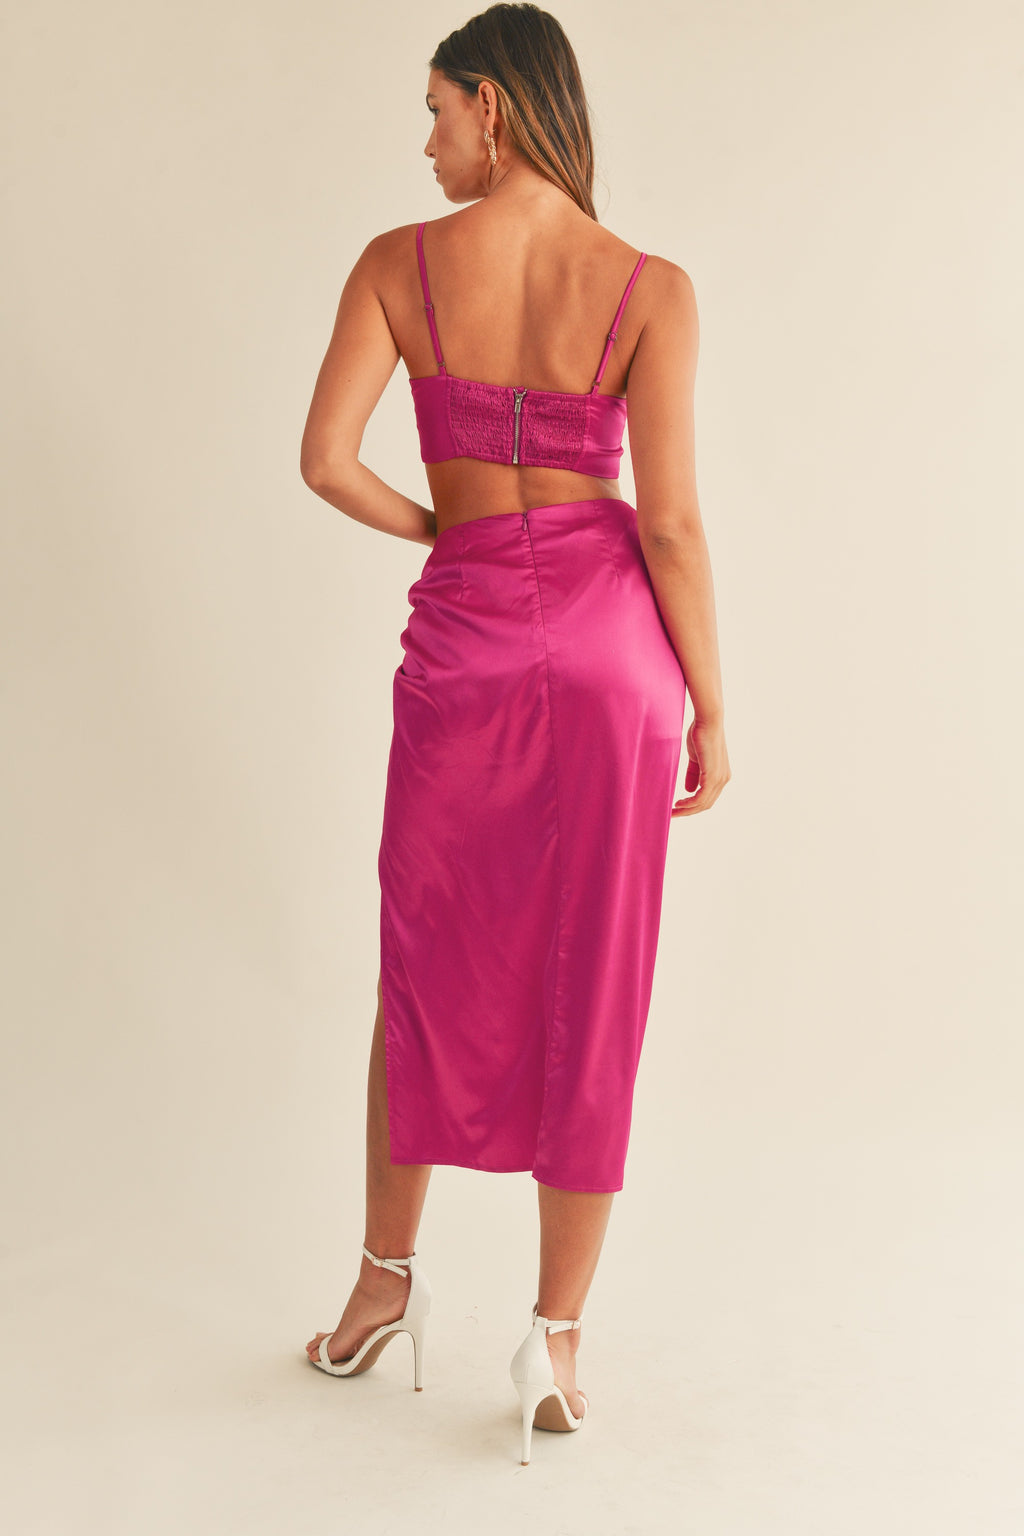 Day Dreamer Two Piece Satin Skirt and Crop Top Set